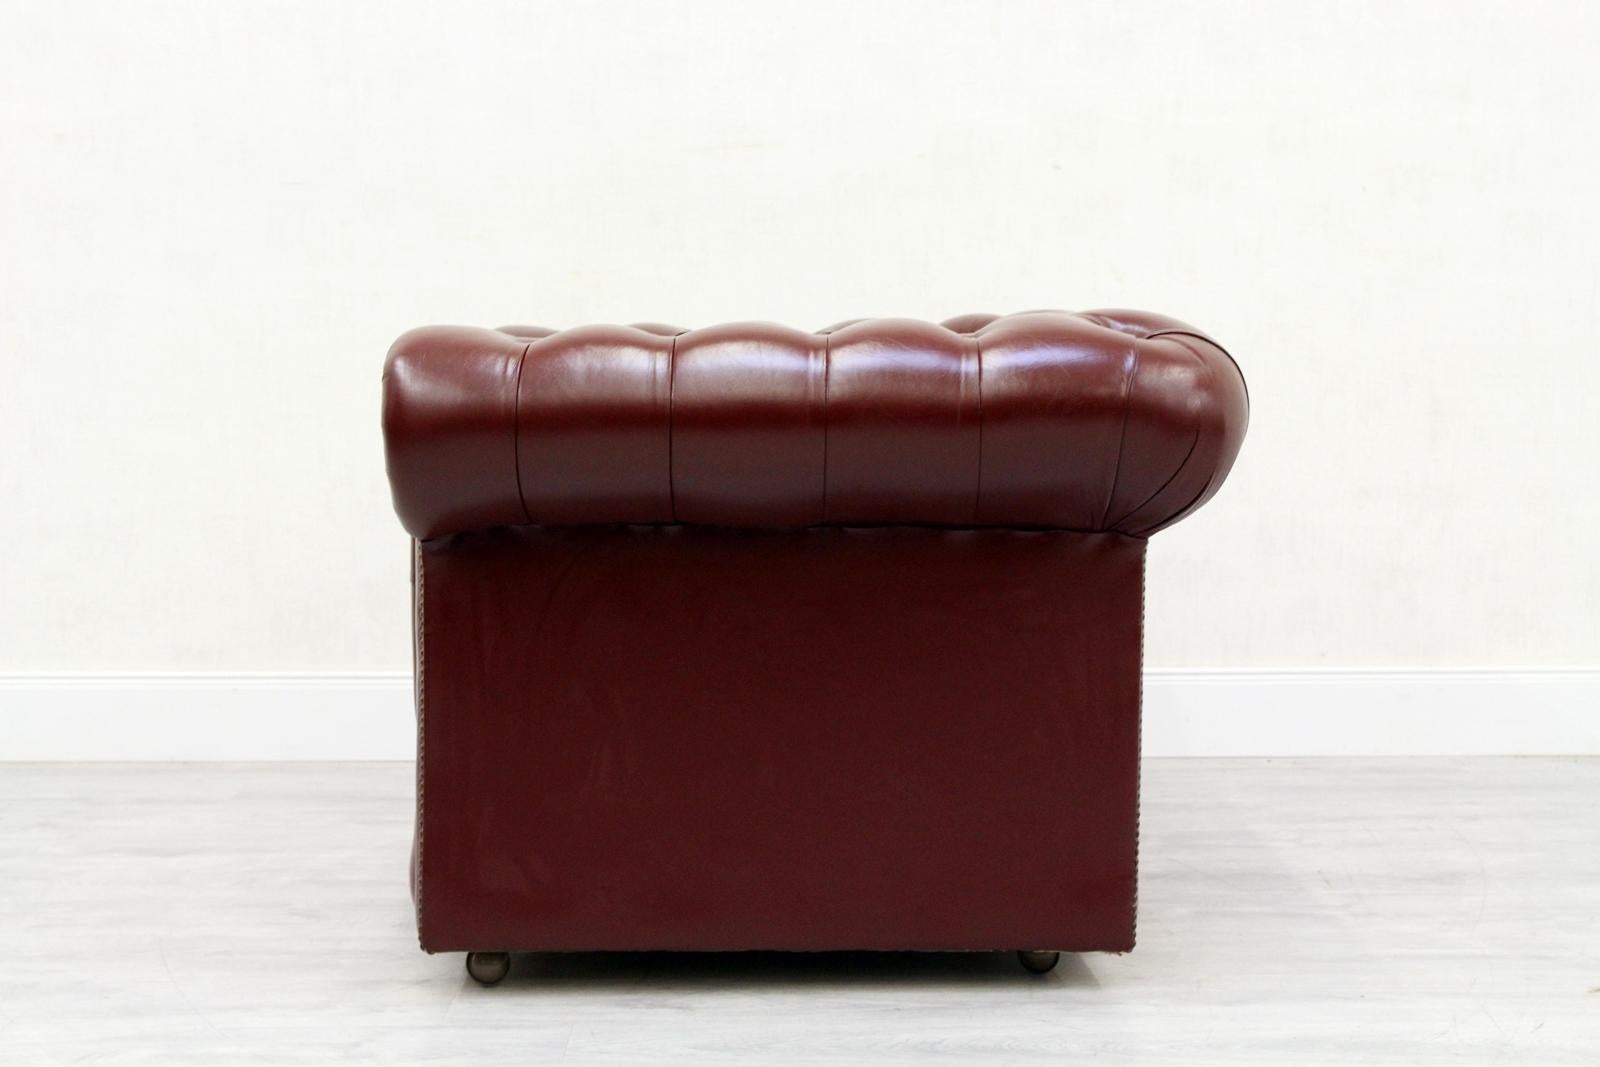 Chesterfield Leather Armchair Antique Vintage English Armchair Oxblood For Sale 4